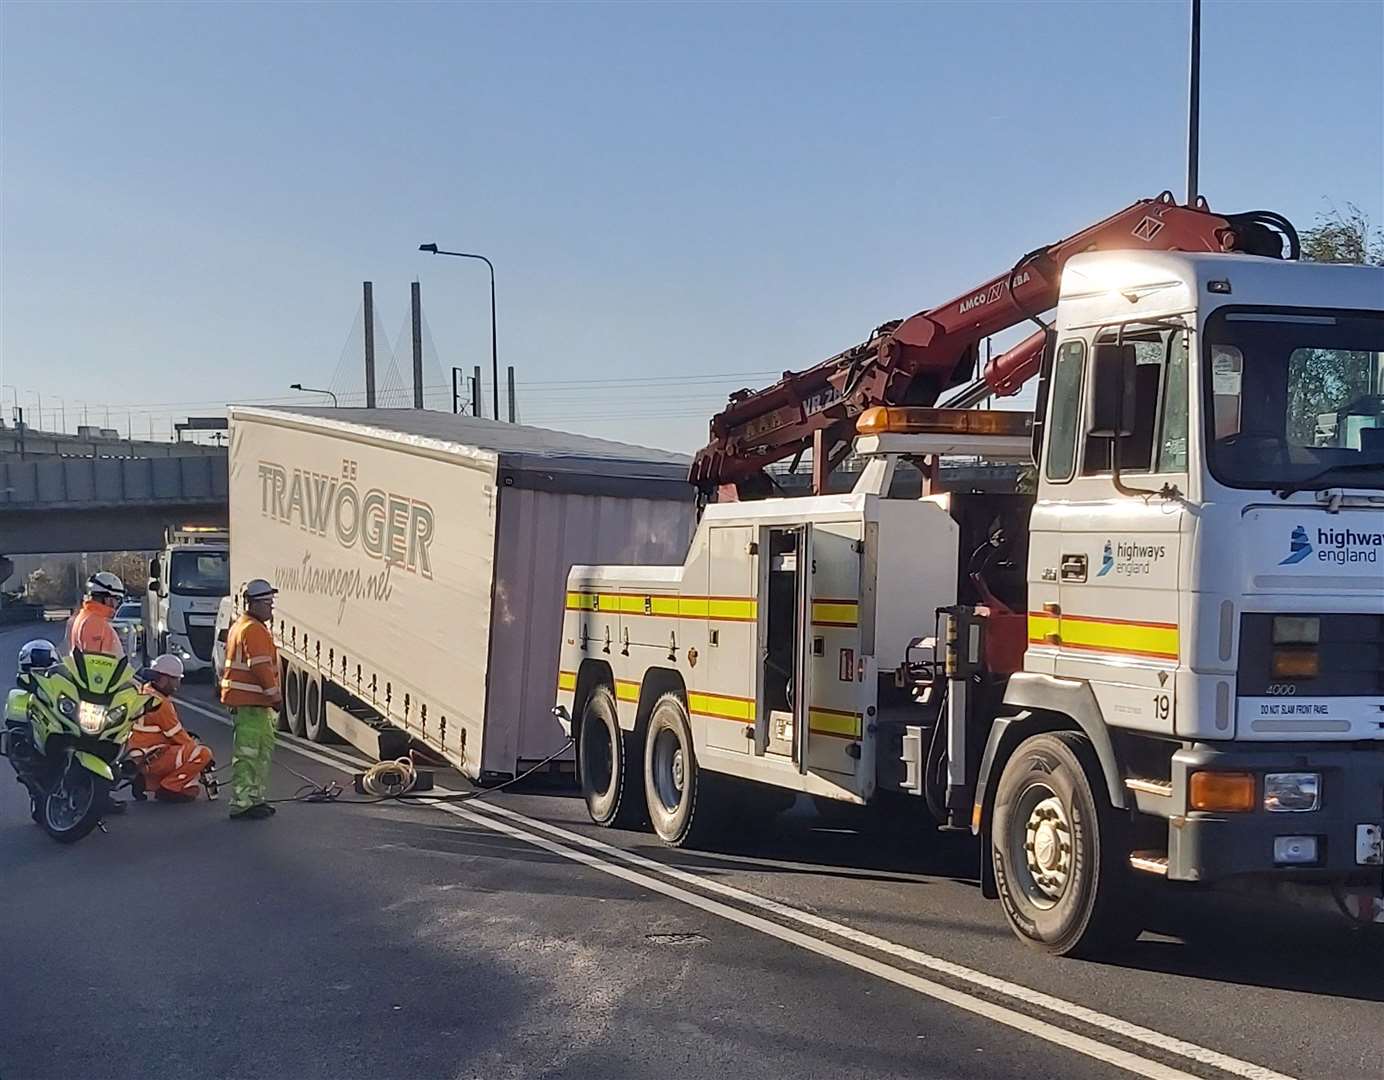 The Dartford east tunnel is currently closed to allow for the recovery of a broken down lorry and its trailer on the Essex side of the Crossing. Photo: @EPRoadsPolicing